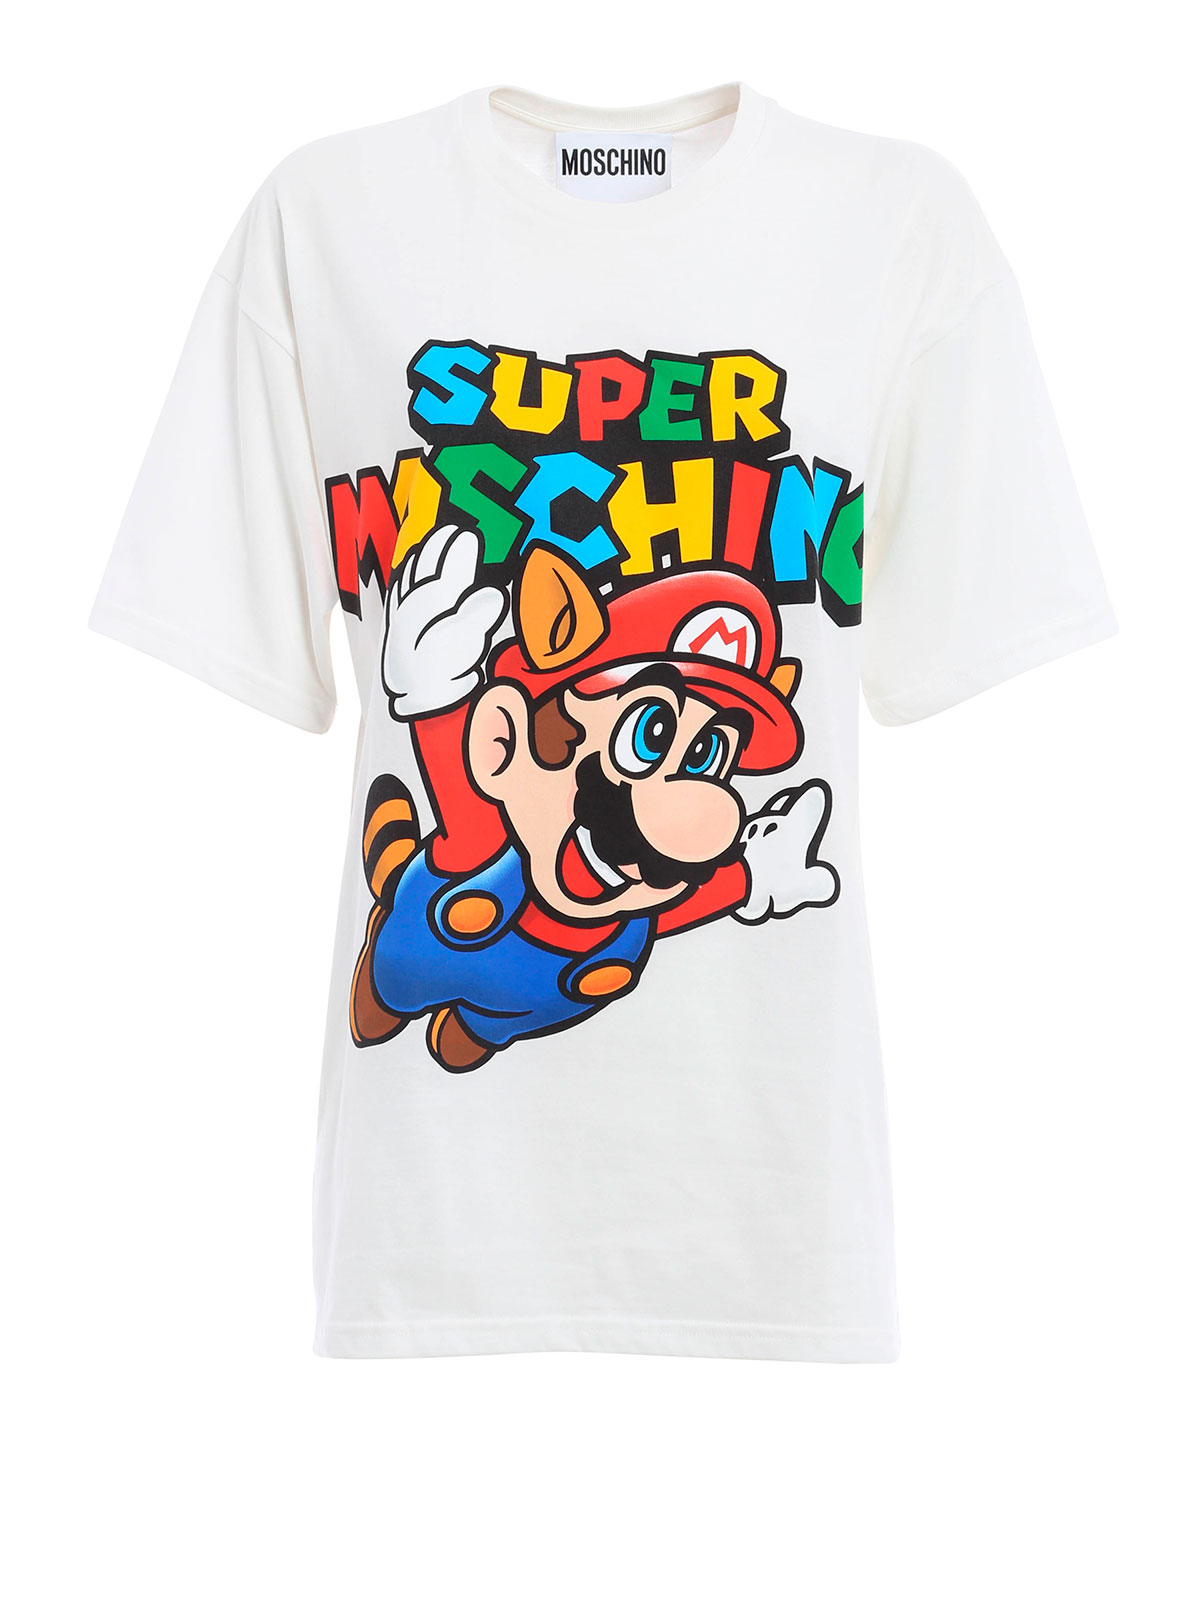 Tシャツ Moschino - Super Moschino T-shirt - V07054401002 | THEBS